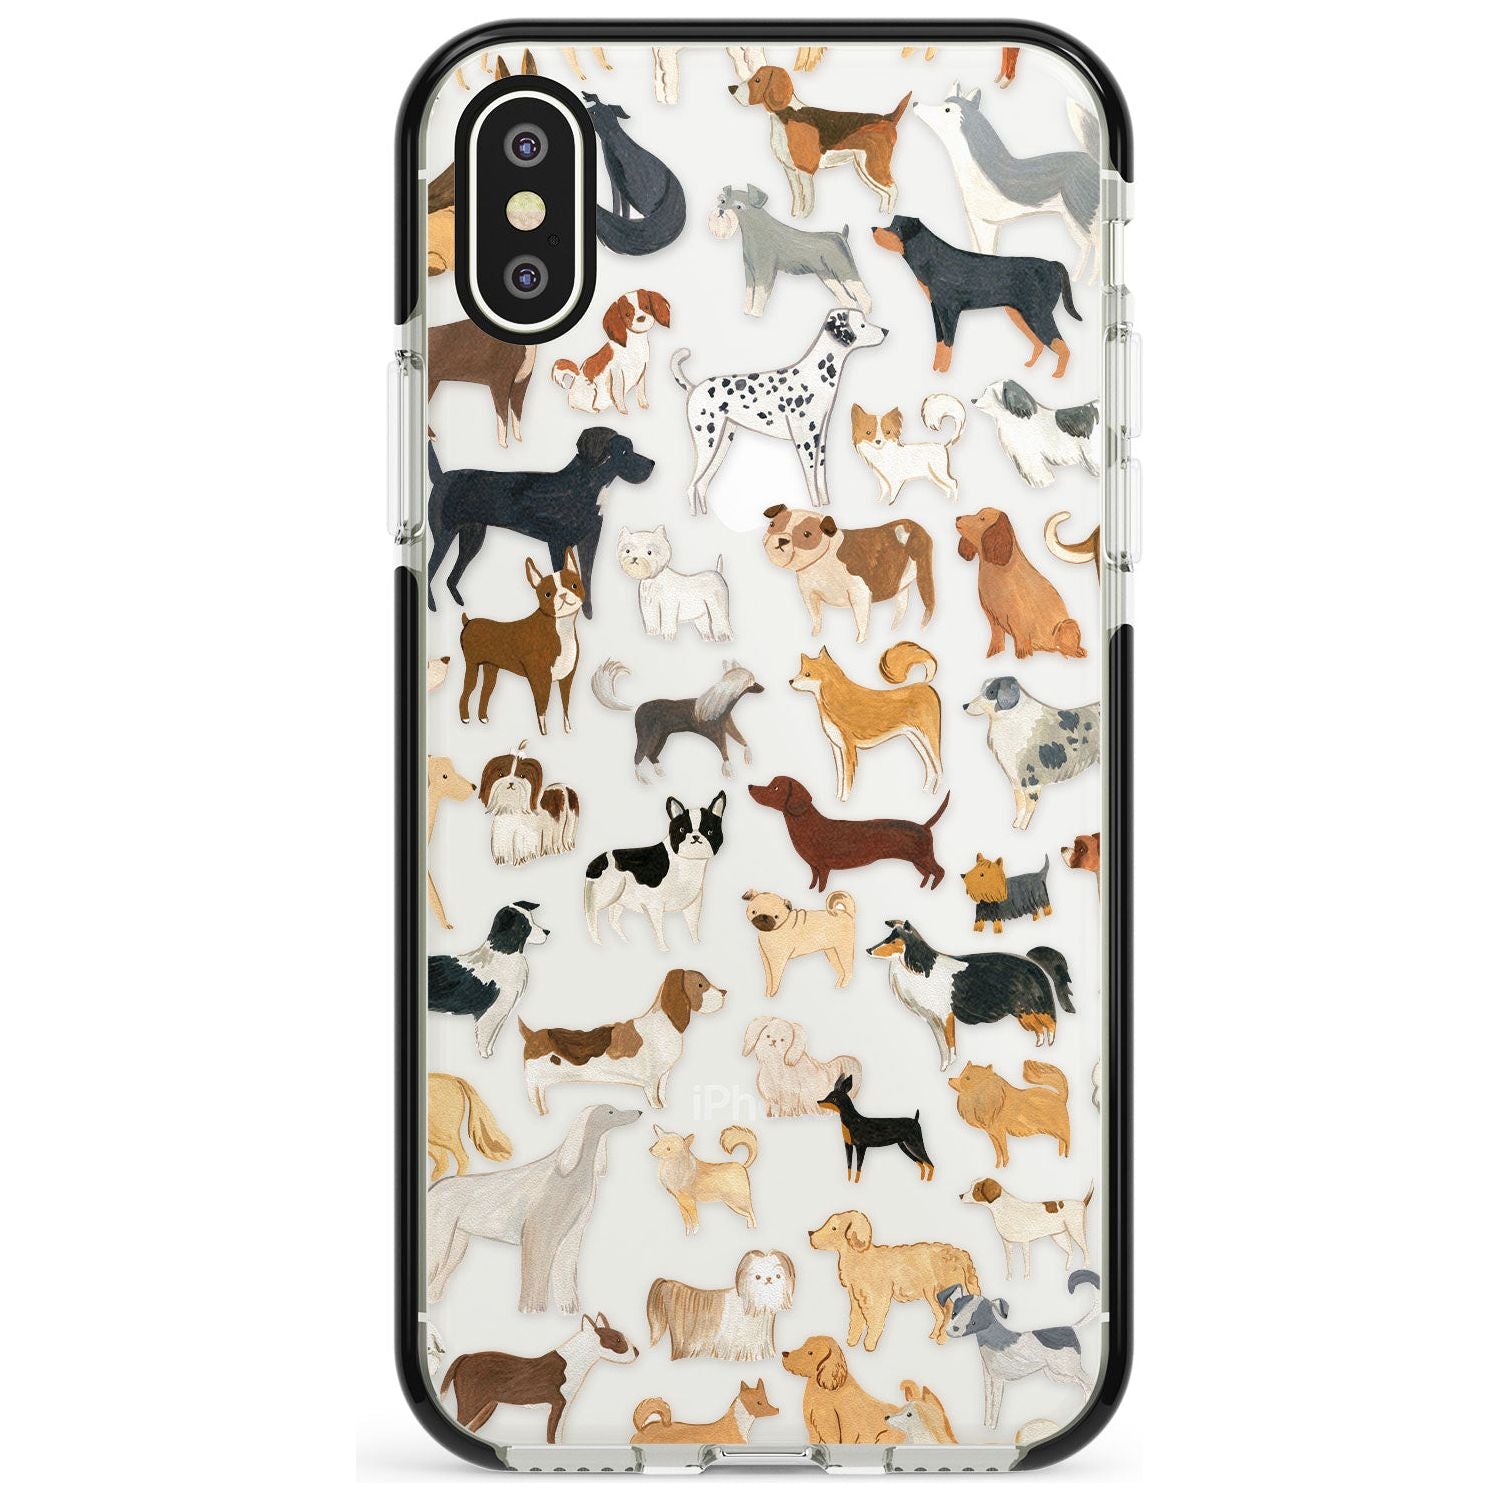 Hand Painted Dogs Black Impact Phone Case for iPhone X XS Max XR